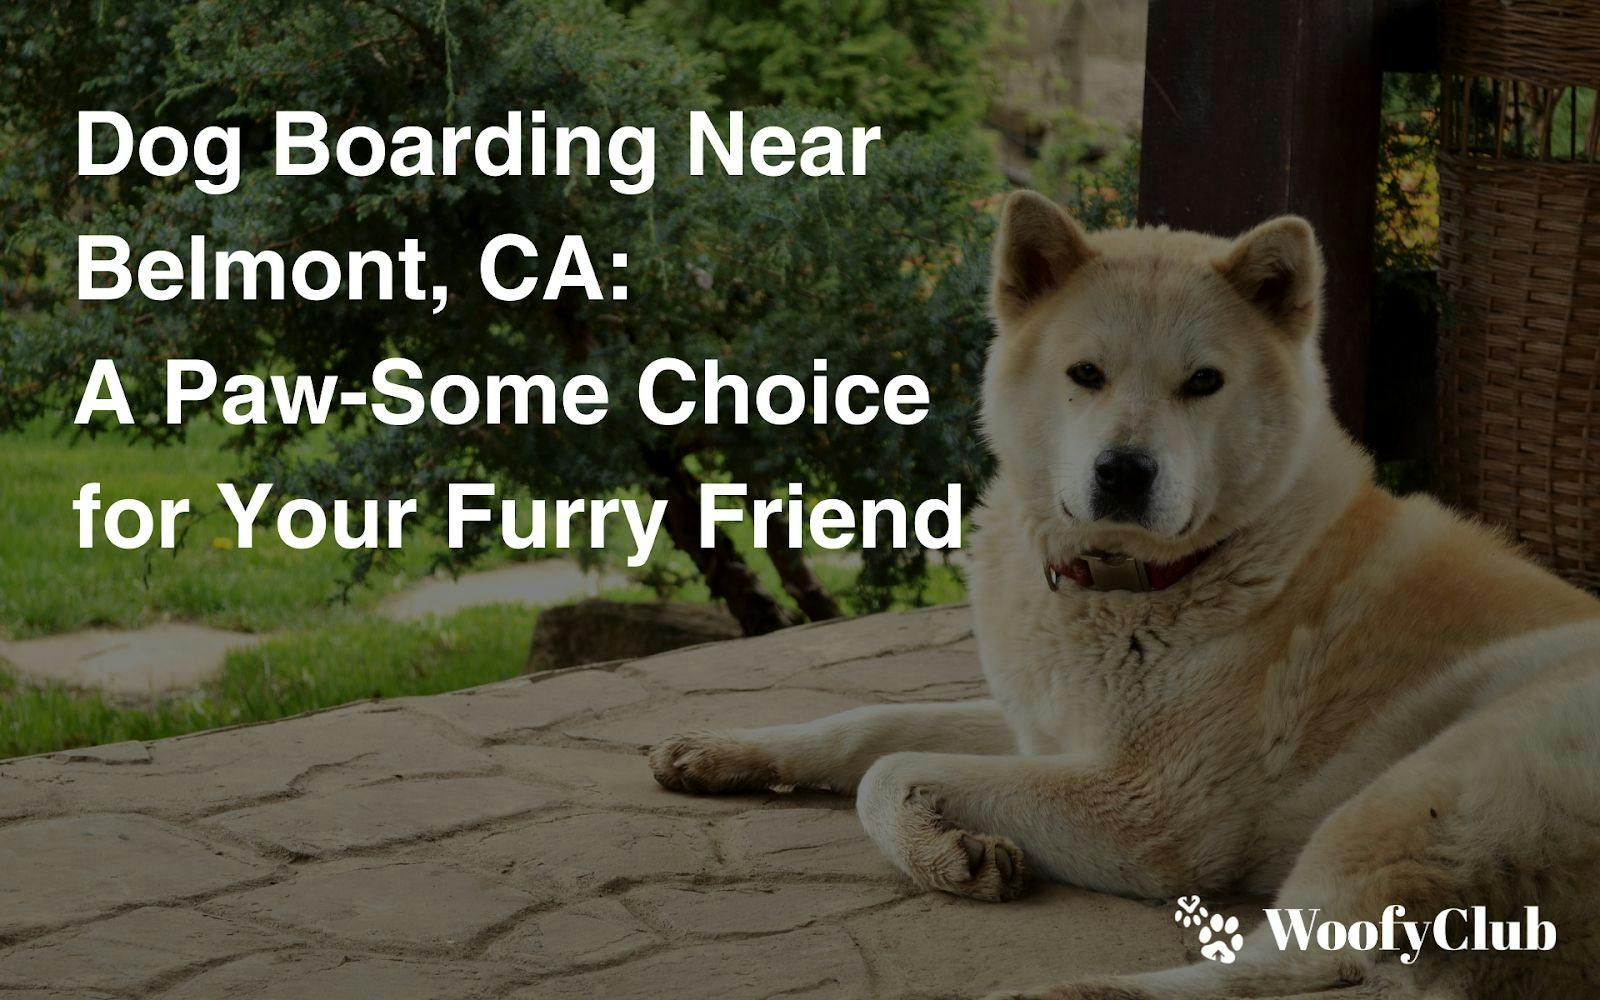 Dog Boarding Near Belmont, CA: A Paw-Some Choice For Your Furry Friend